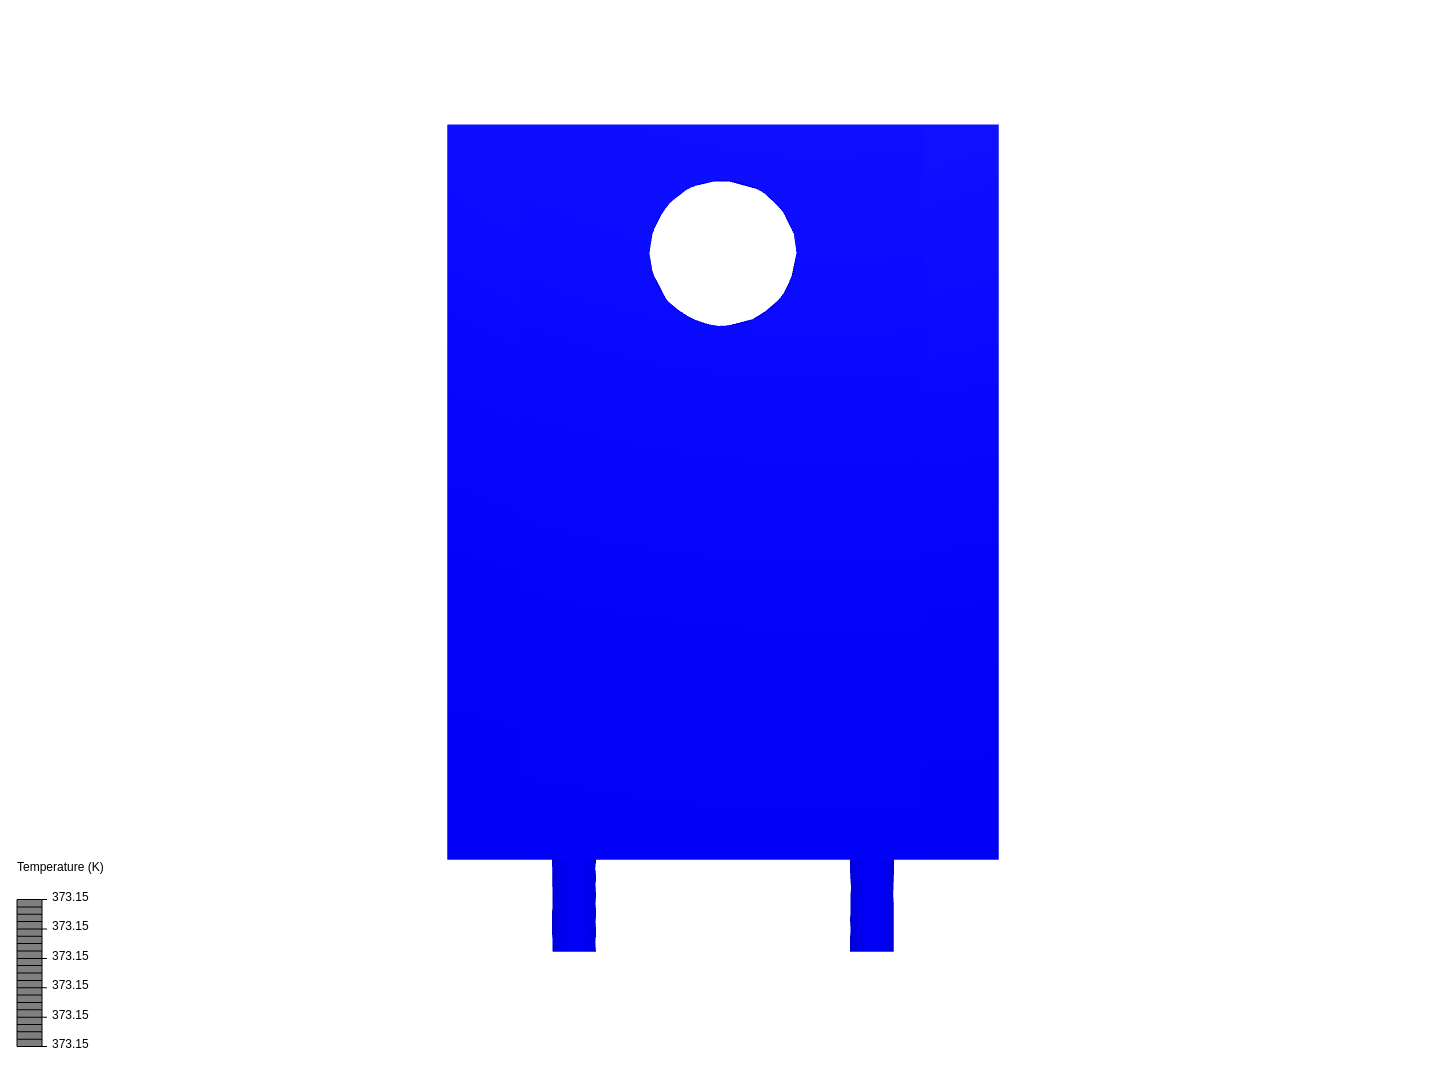 Example of a Heat Sink image